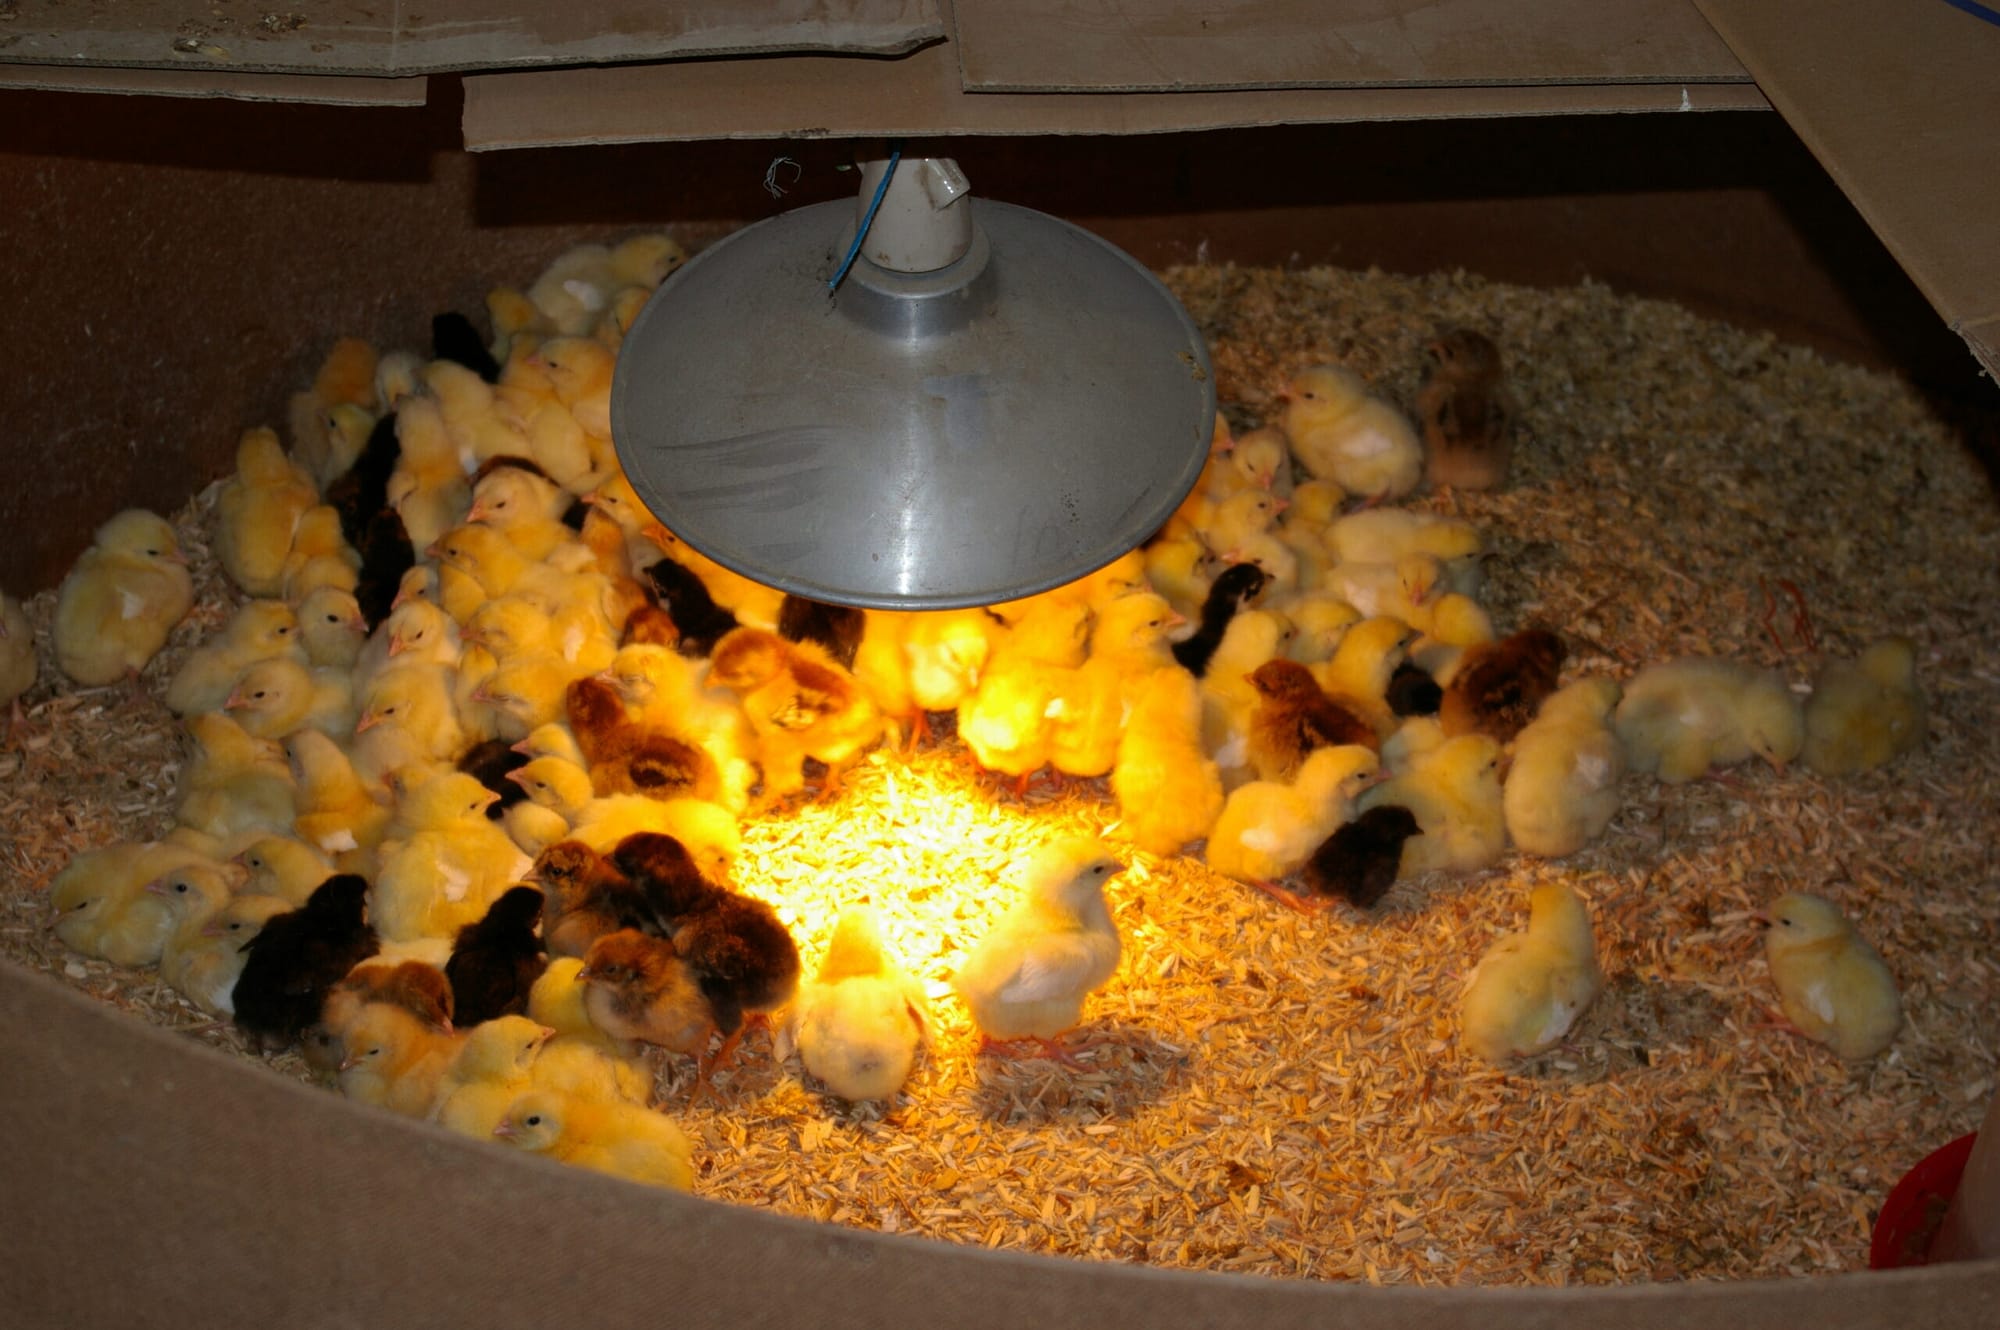 Day old chicks from Perfect Poultry